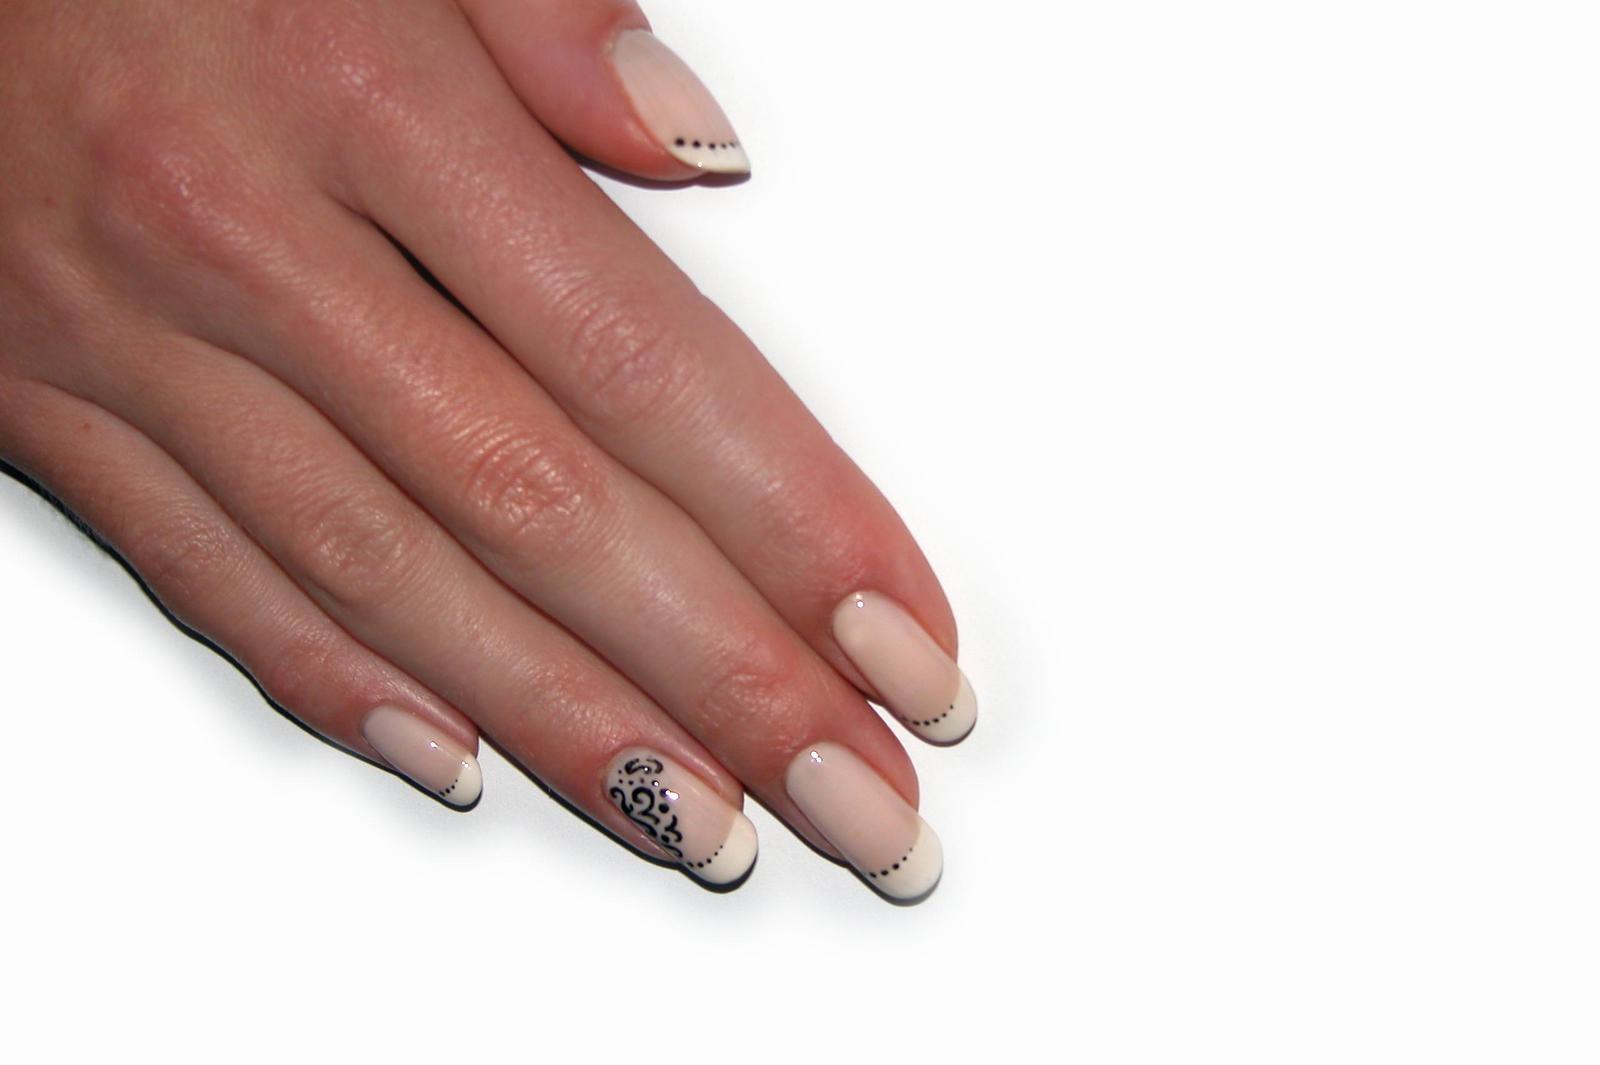 a person's manicured nails with white and black details